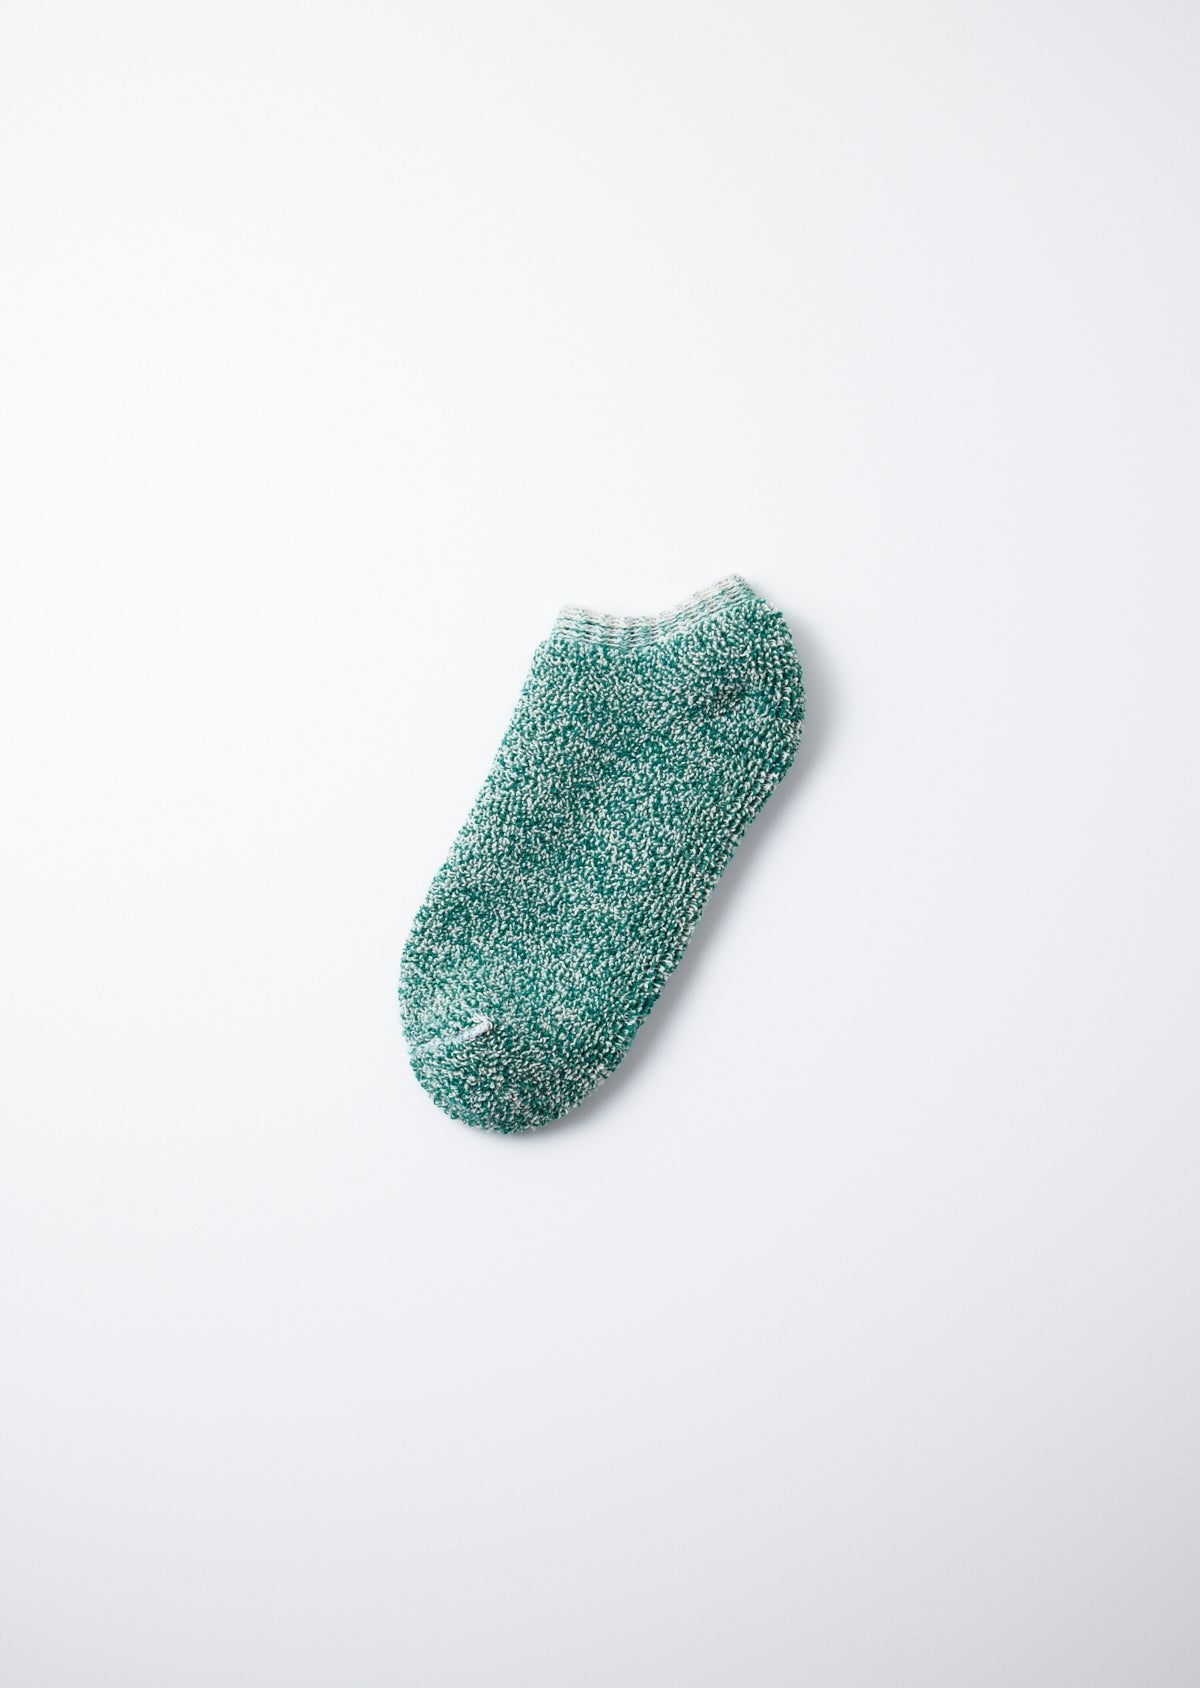 RECYCLED COTTON PILE SOCKSLIPPER